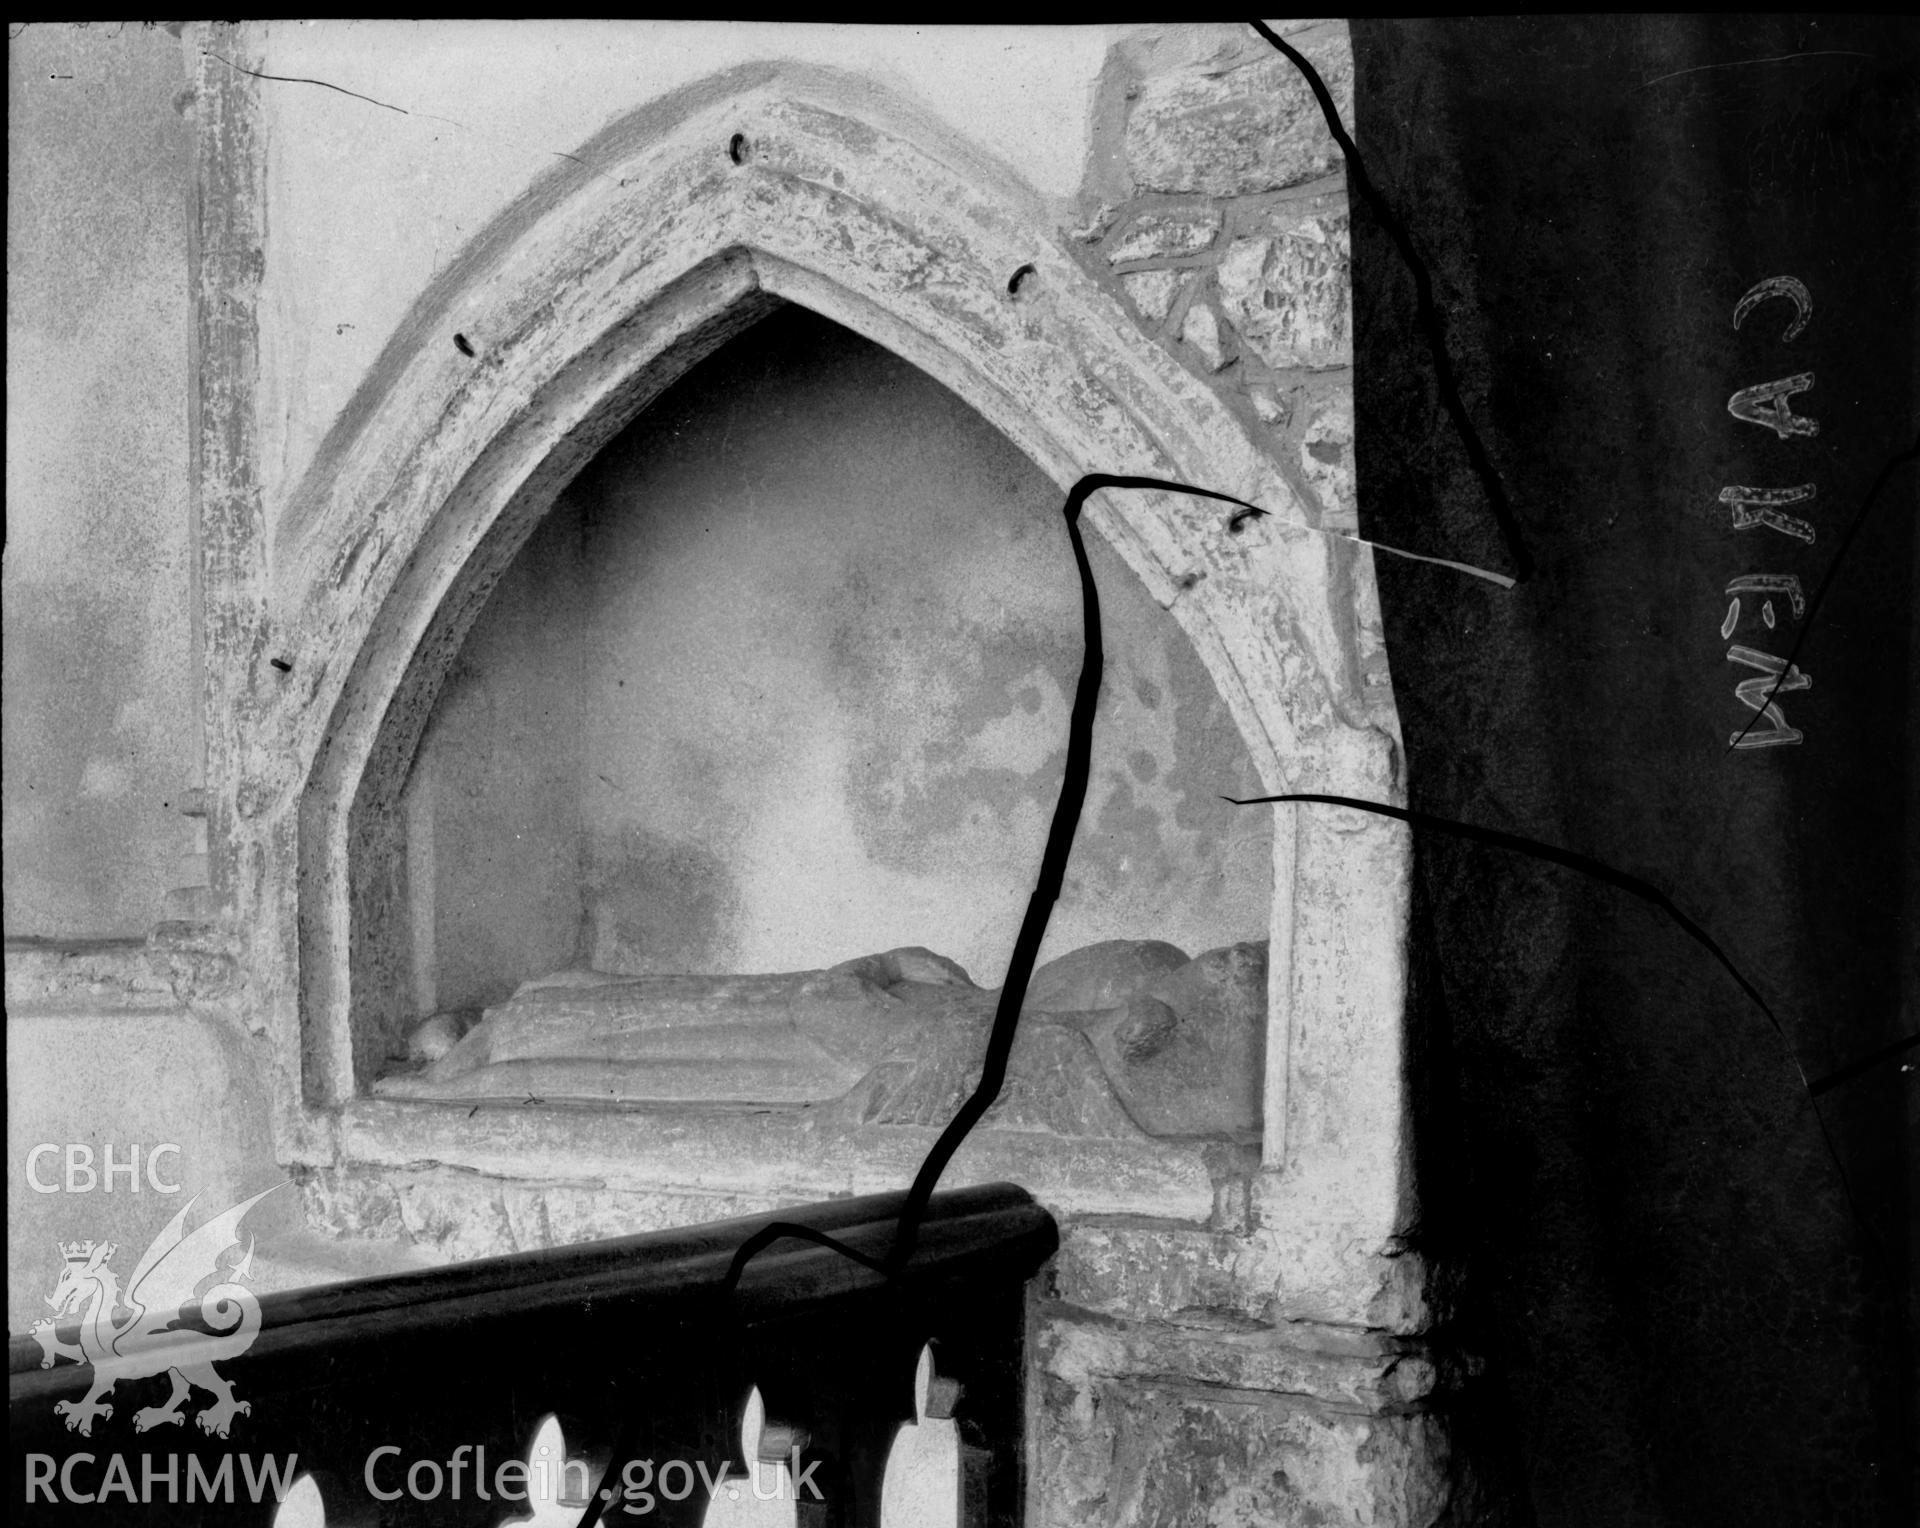 Black and white photo showing memorial tomb in Carew Church.